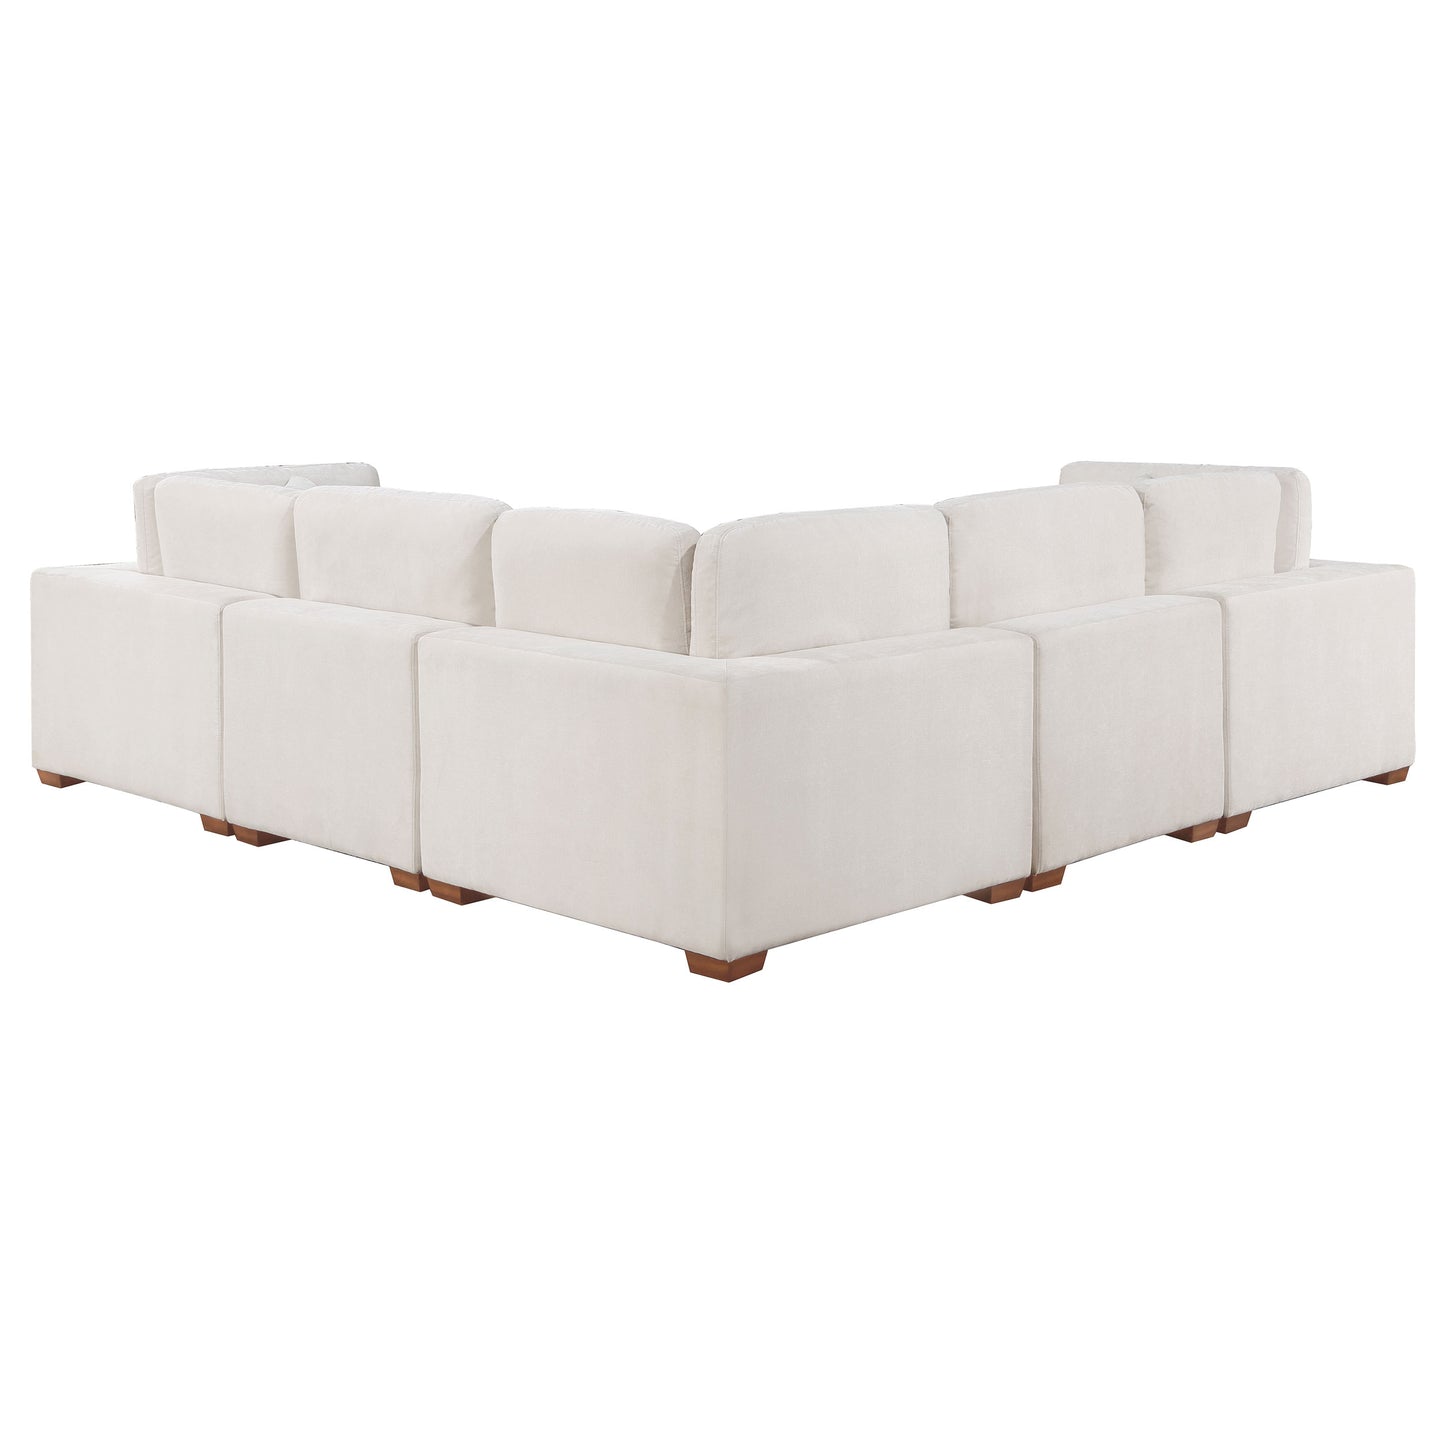 Lakeview 5-piece Upholstered Modular Sectional Sofa Ivory